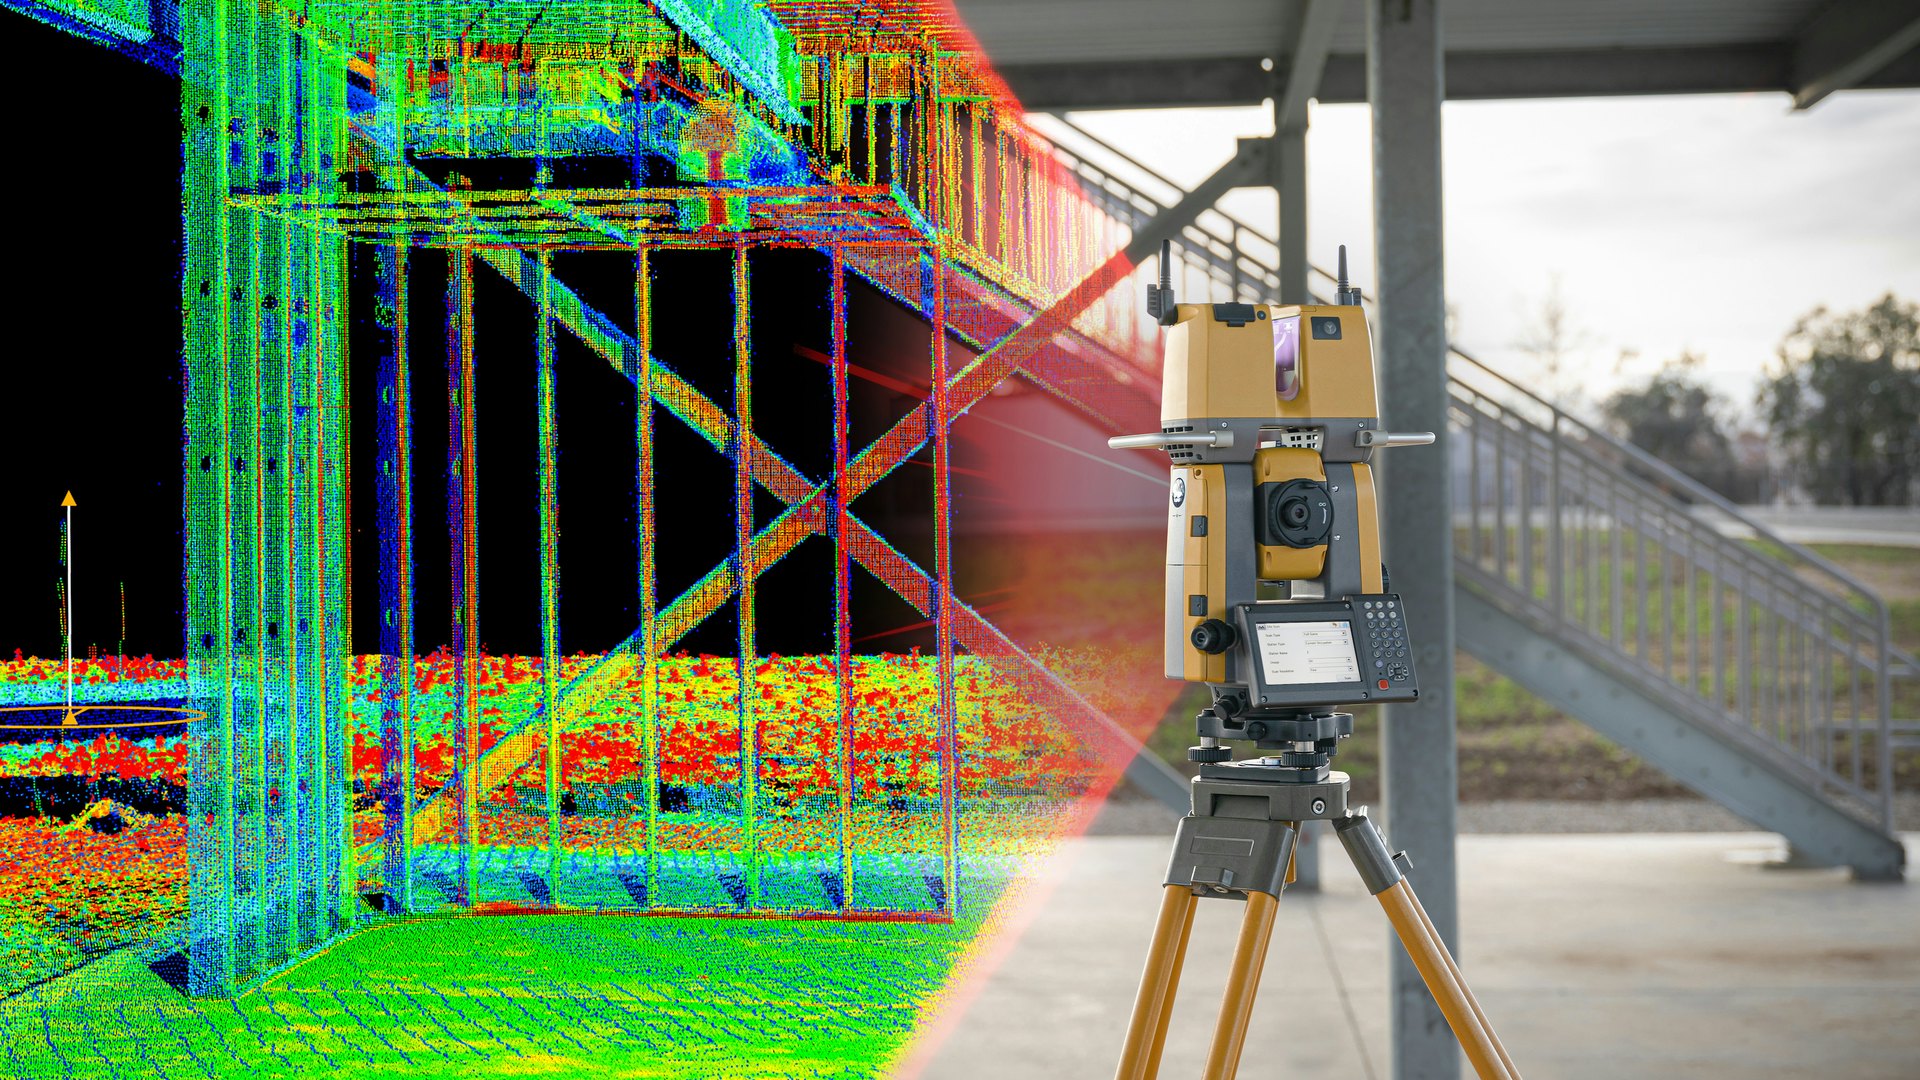 Topcon GTL-1200 Scanning Robotic Total Station From: Topcon Positioning Systems | For Construction Pros